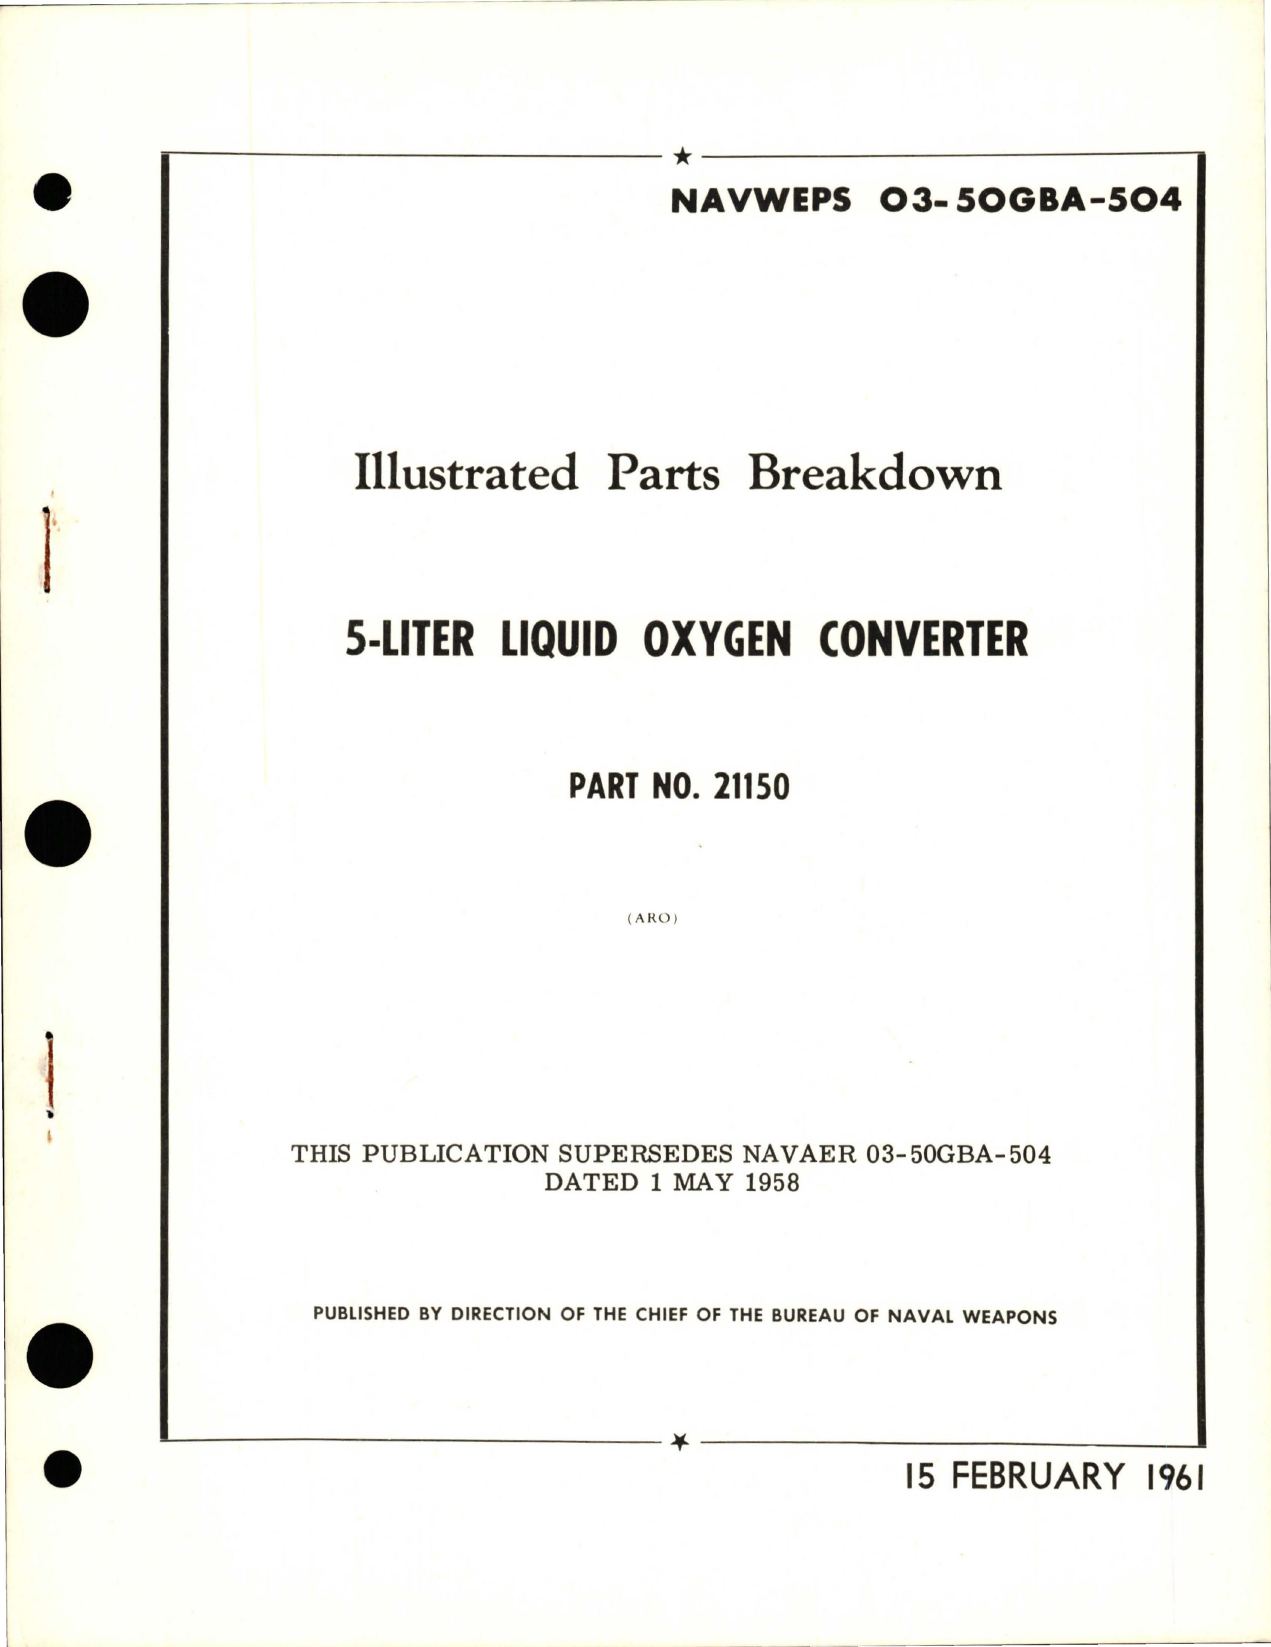 Sample page 1 from AirCorps Library document: Illustrated Parts Breakdown for 5-Liter Liquid Oxygen Converter - Part 21150 